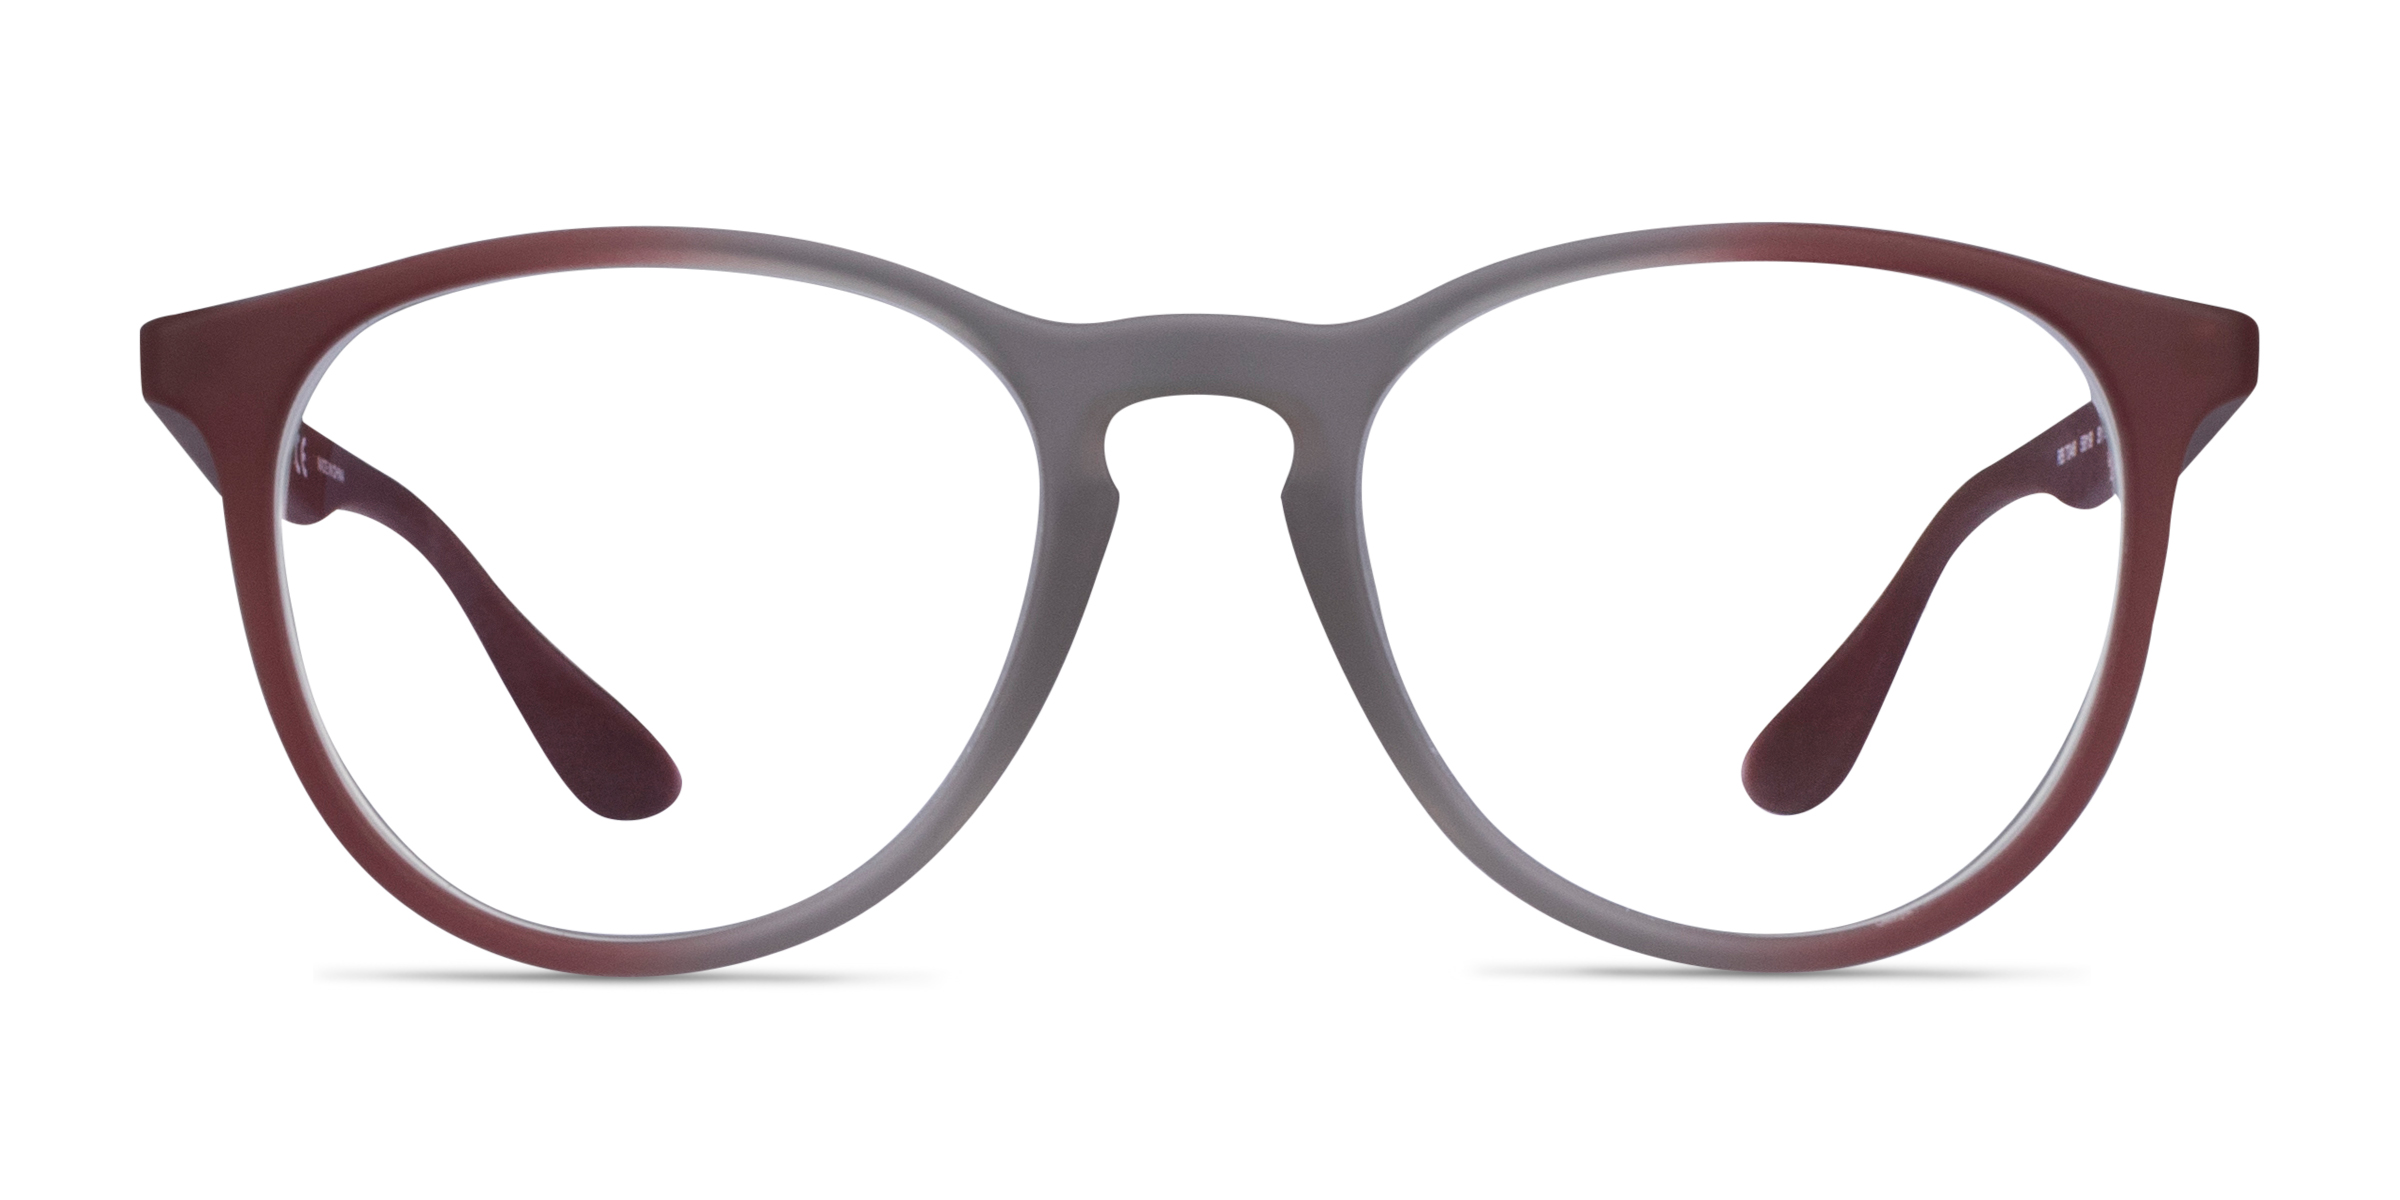 Ray-Ban RB7046 - Round Gray Red Frame Glasses For Women | Eyebuydirect